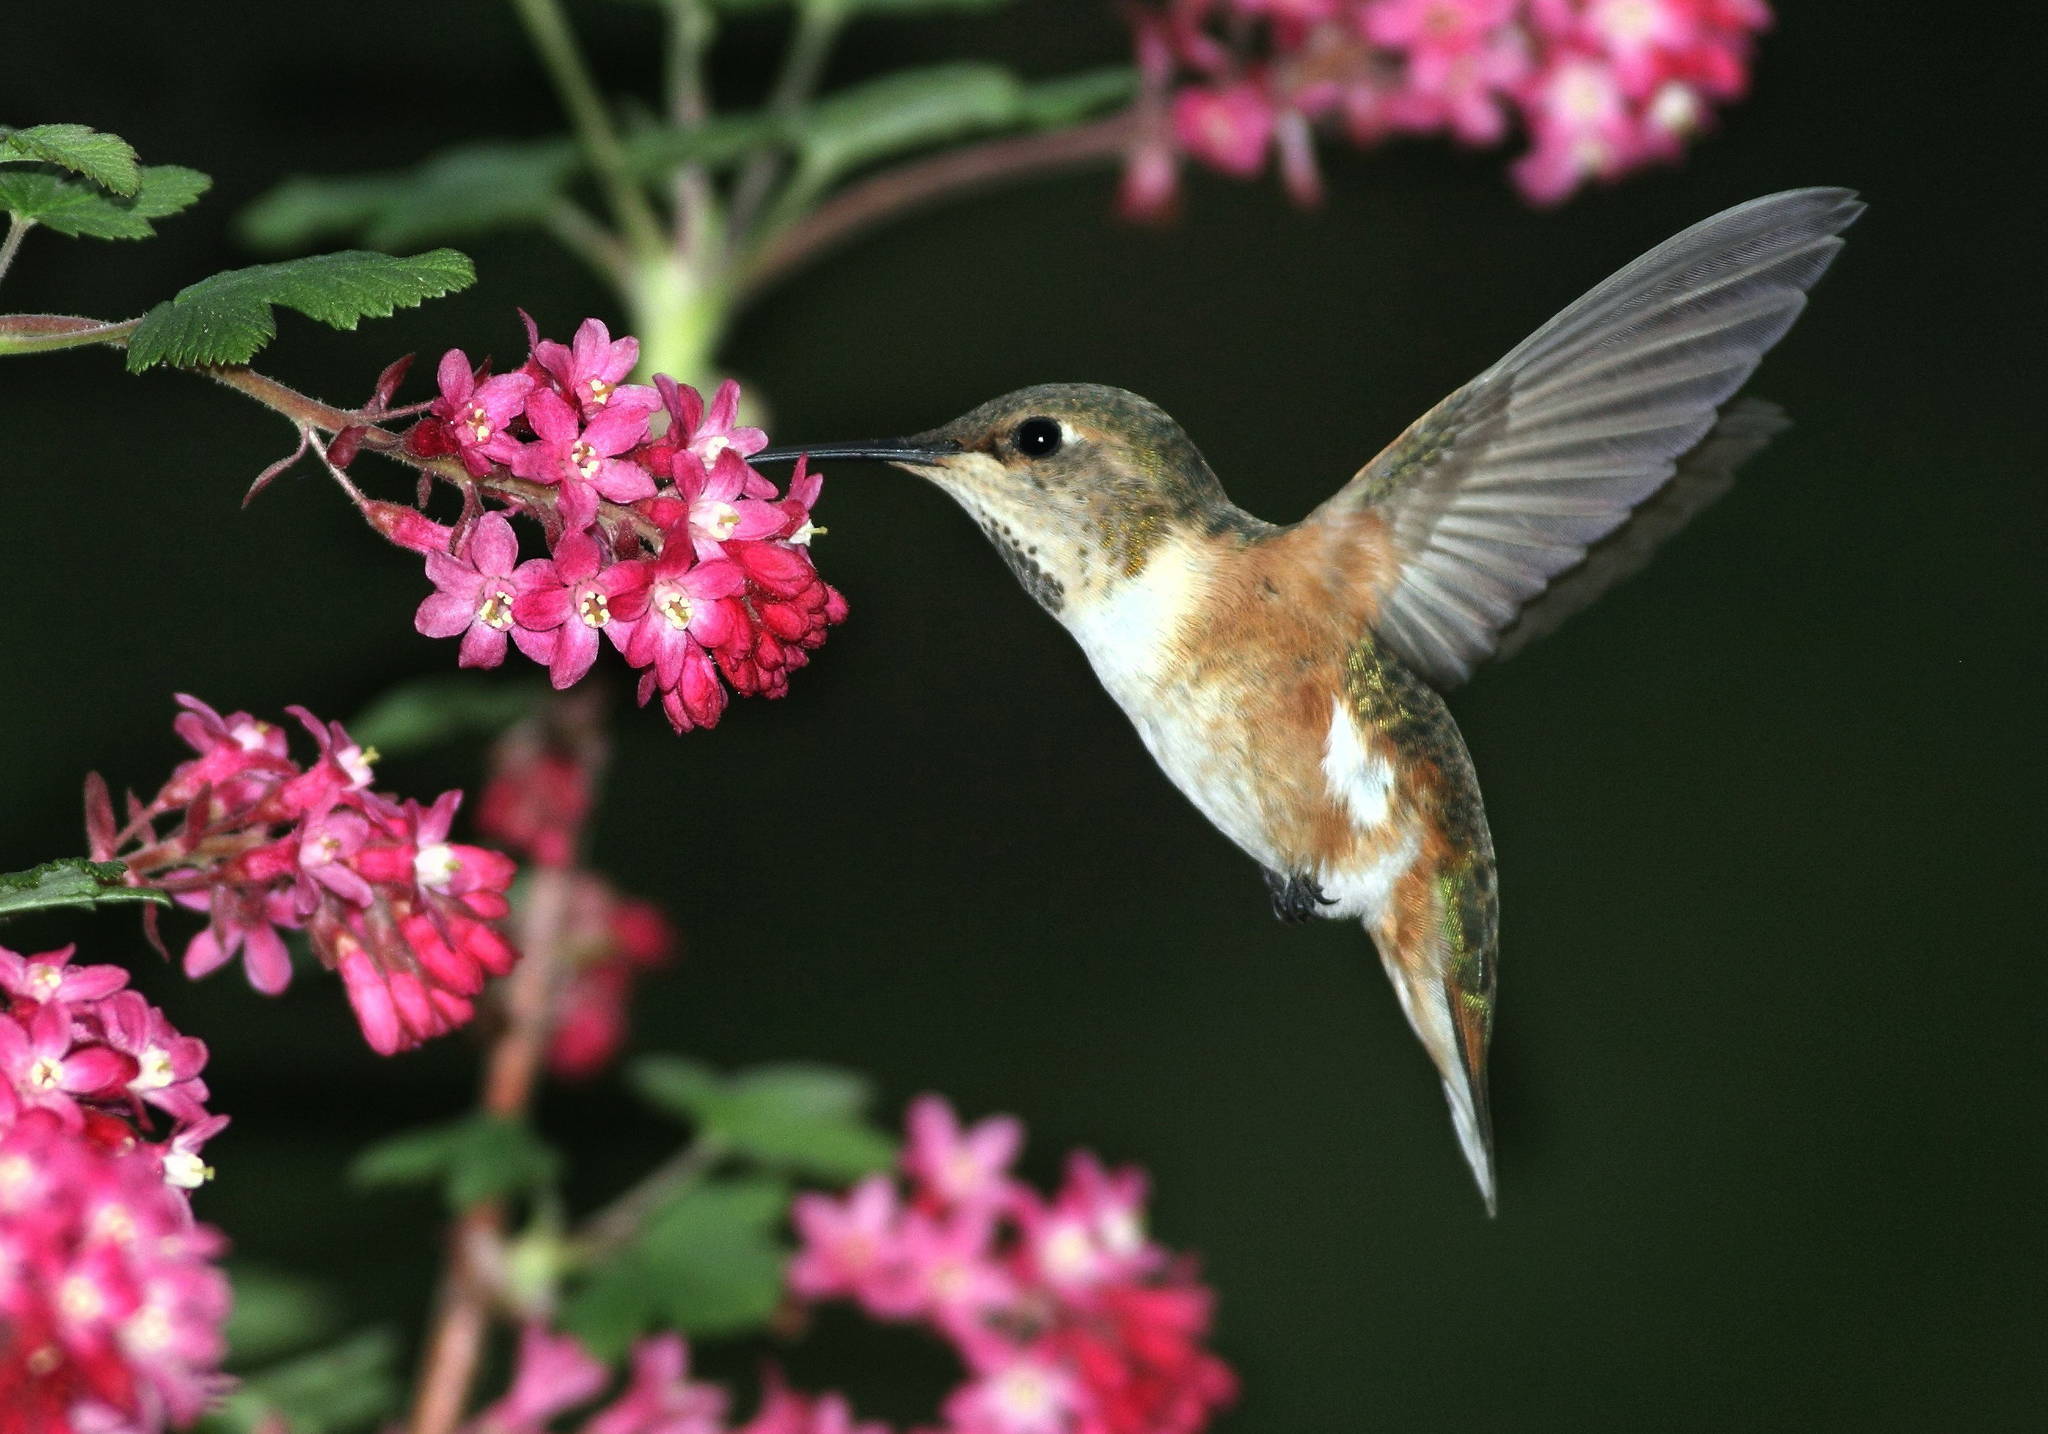 Photo by Janine Schutt: A female rufus hummingbird visits a red-flowering currant.